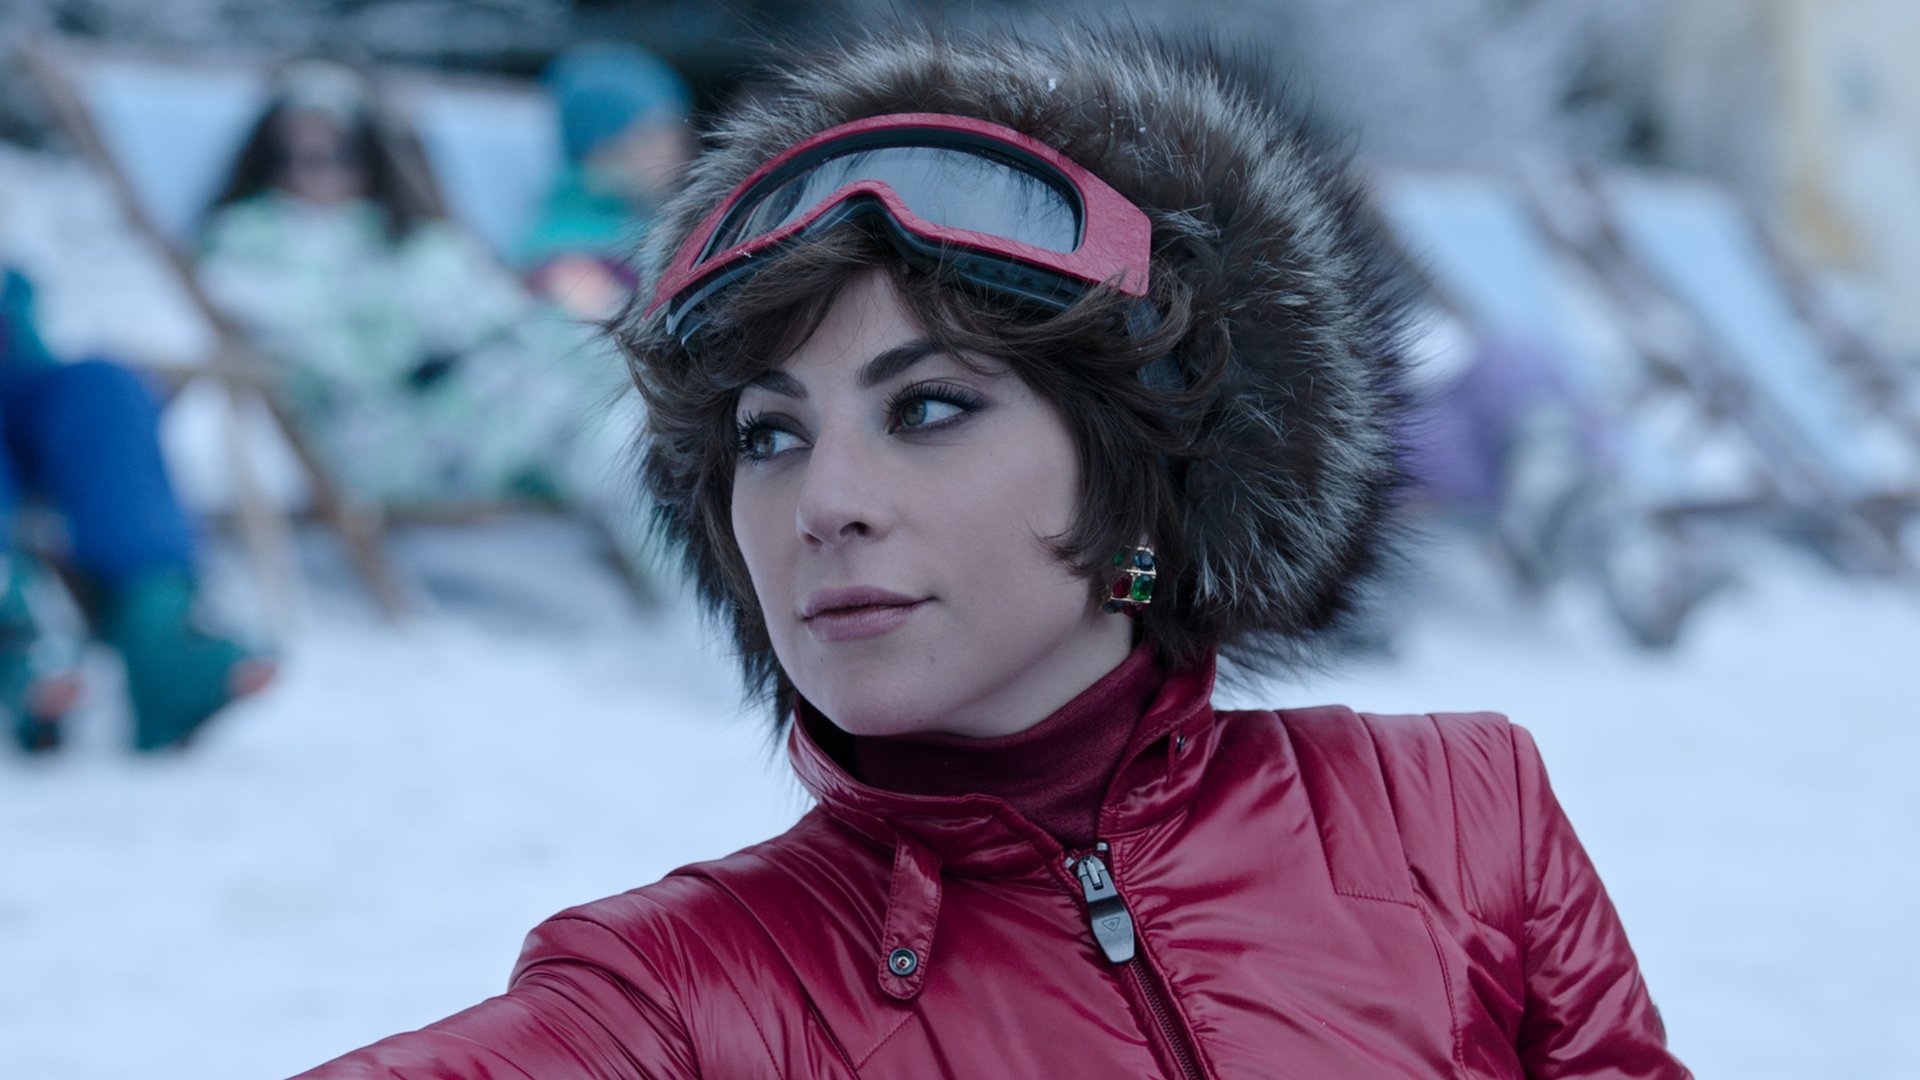 A woman dressed in fashionable ski wear sits on a deckchair in the snow.